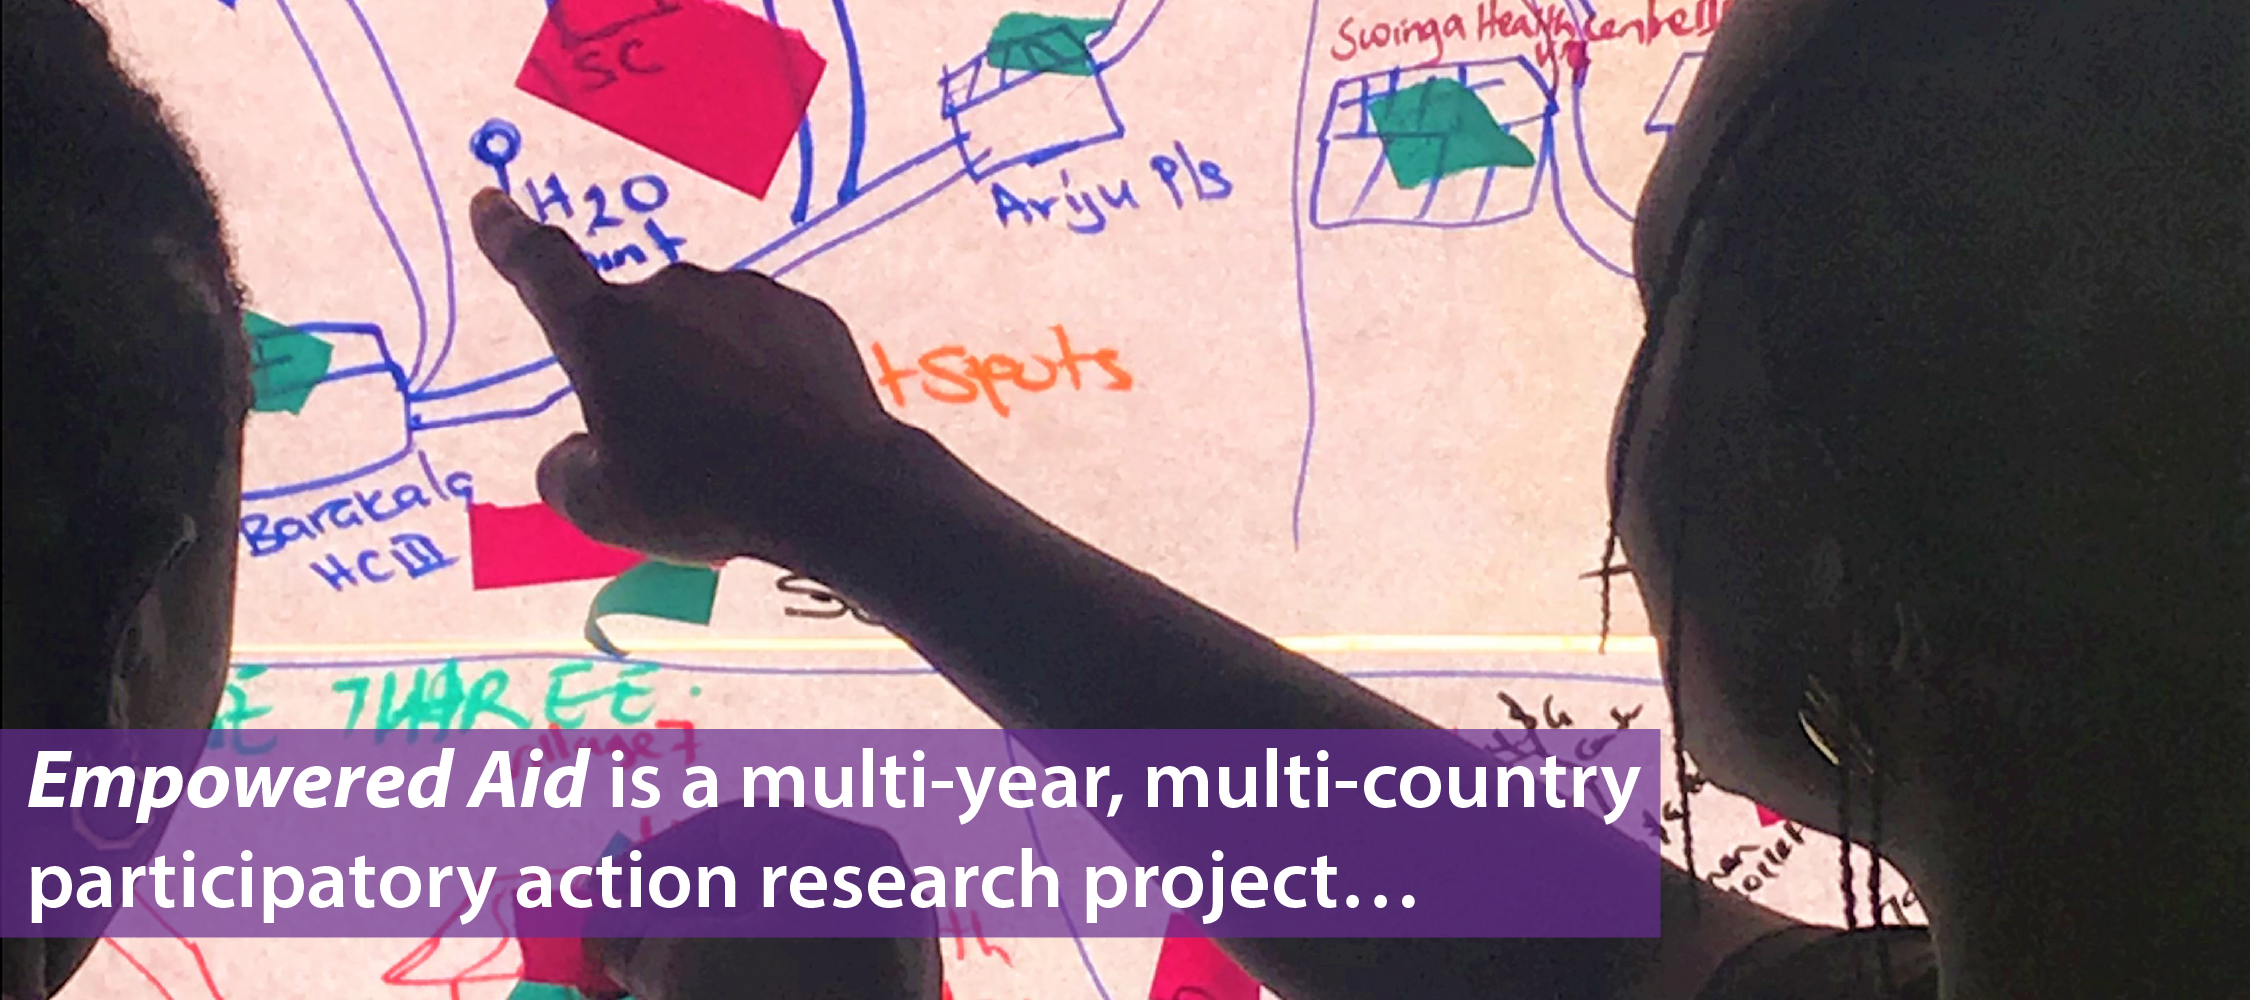 Empowered Aid is a multi-year, multi-country participatory action research project...